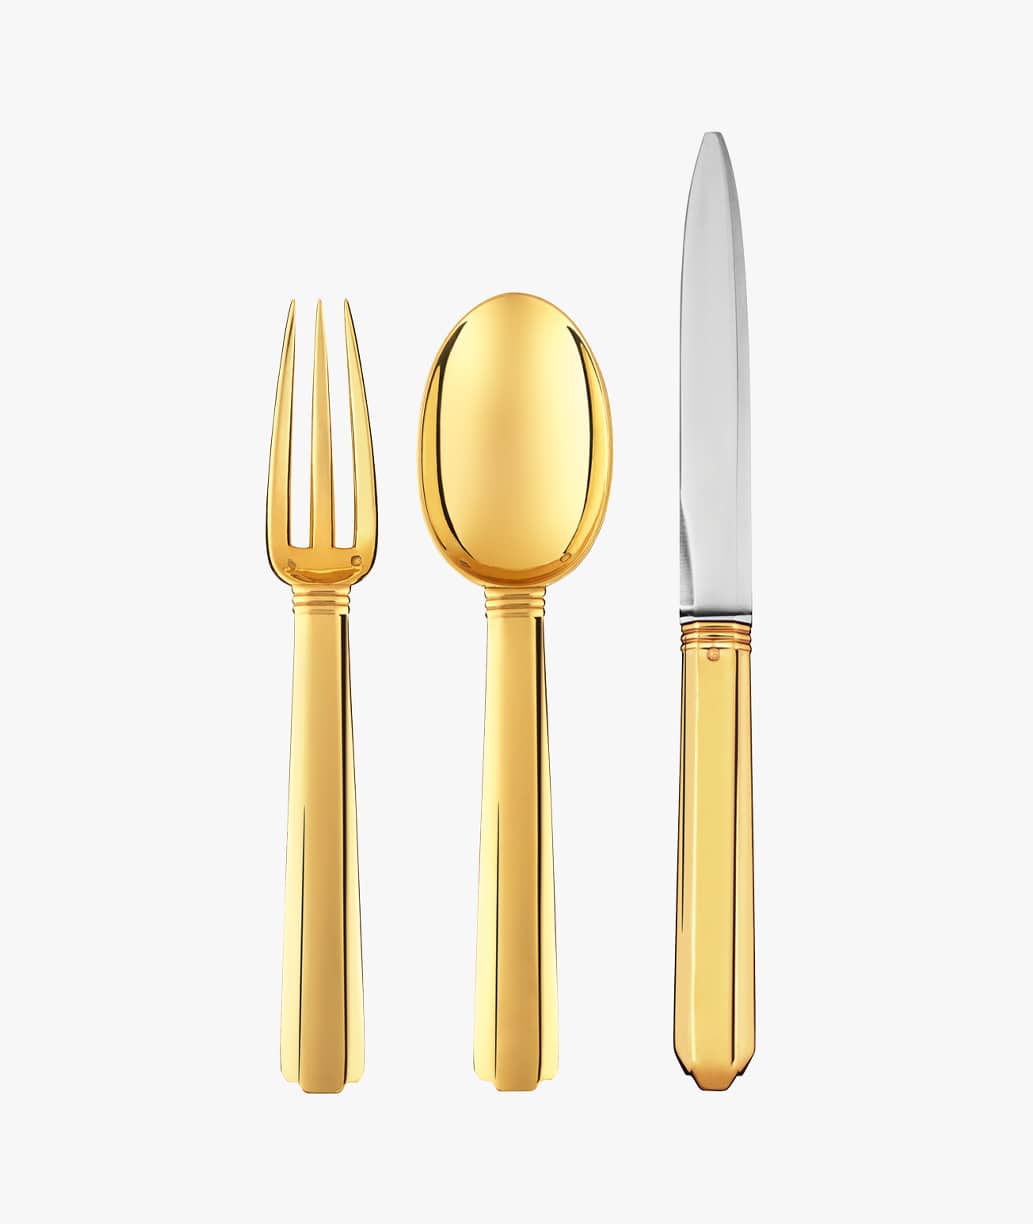 Puiforcat Bayonne collection in sterling silver and gold gilt finish - set of three table cultery